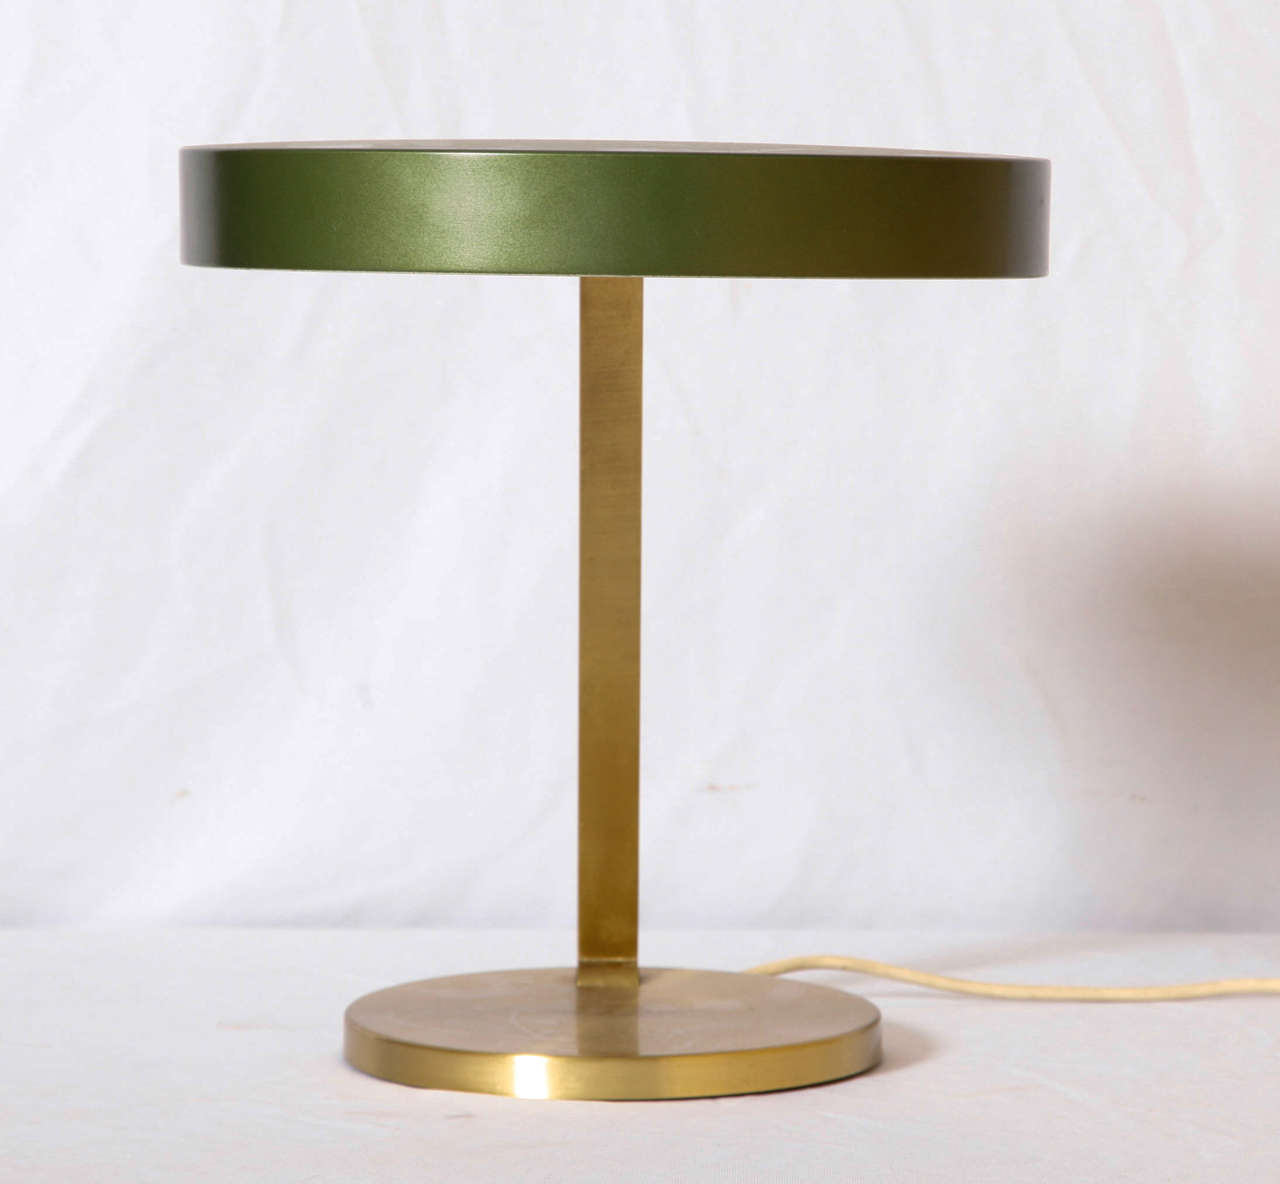 Adjustable desk lamp having an enameled emerald green shade connected by a curved brass stem and base, by Bauhaus designer Christian Dell.